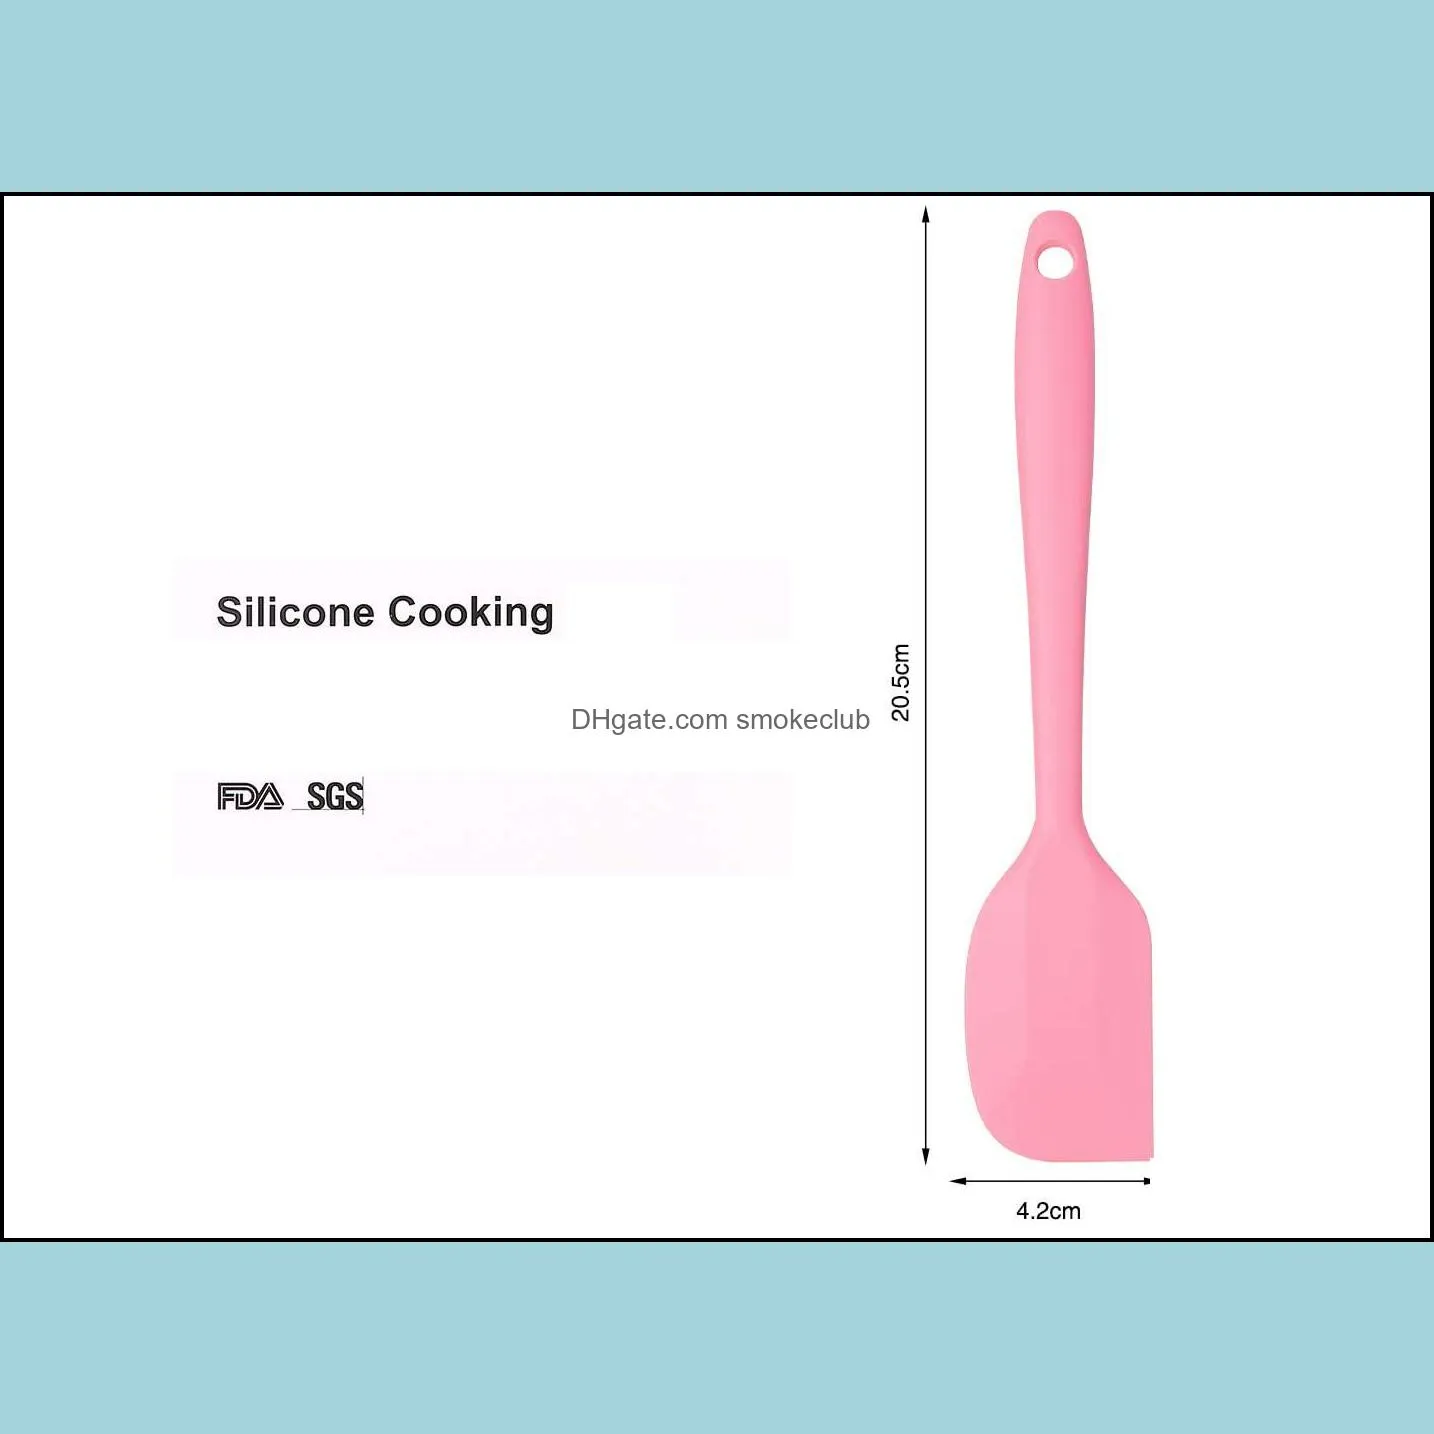 Silicone Spatula - 500°F Heat Resistant Seamless Rubber Kitchen Baking and Mixing Color Gradient Design set of one